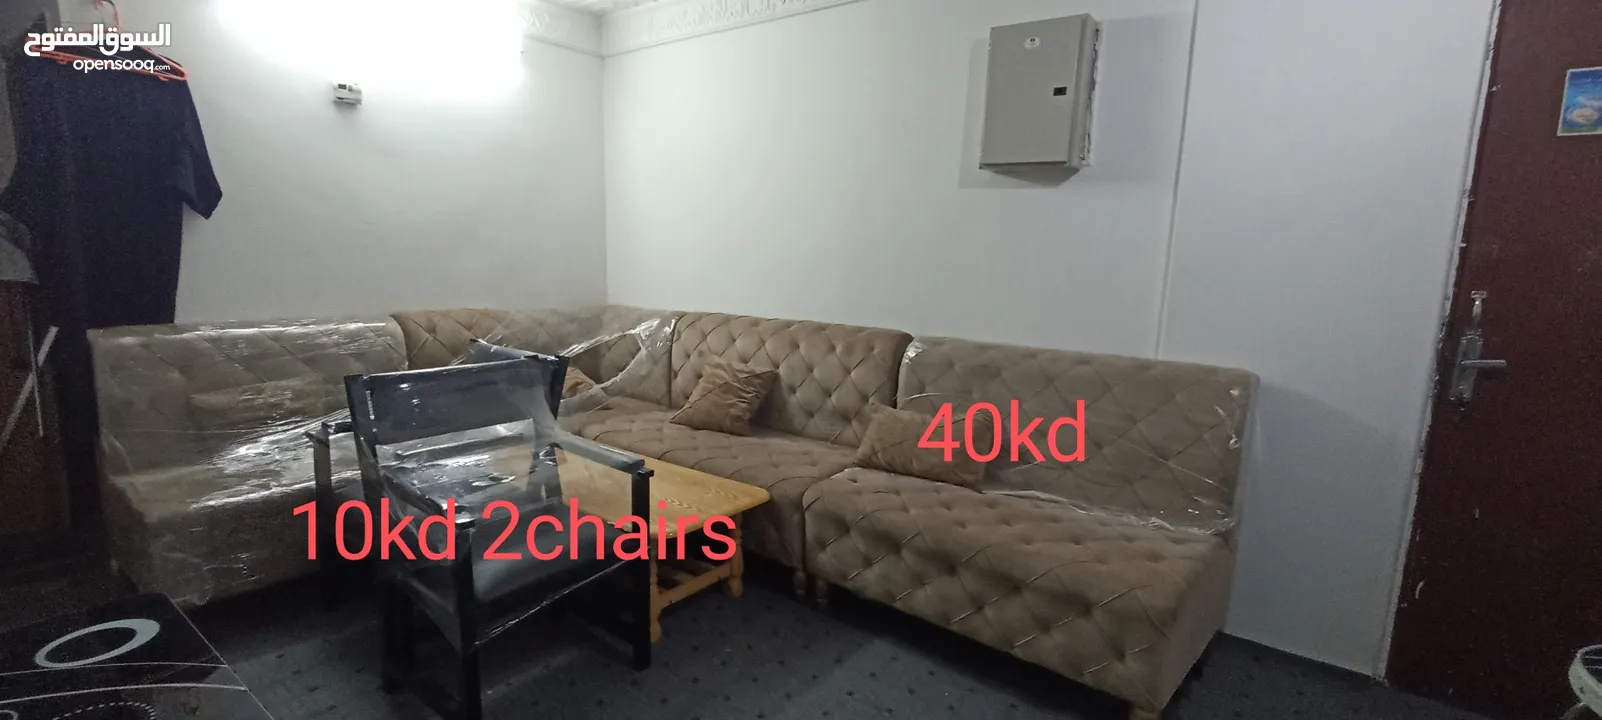 sofa and chair